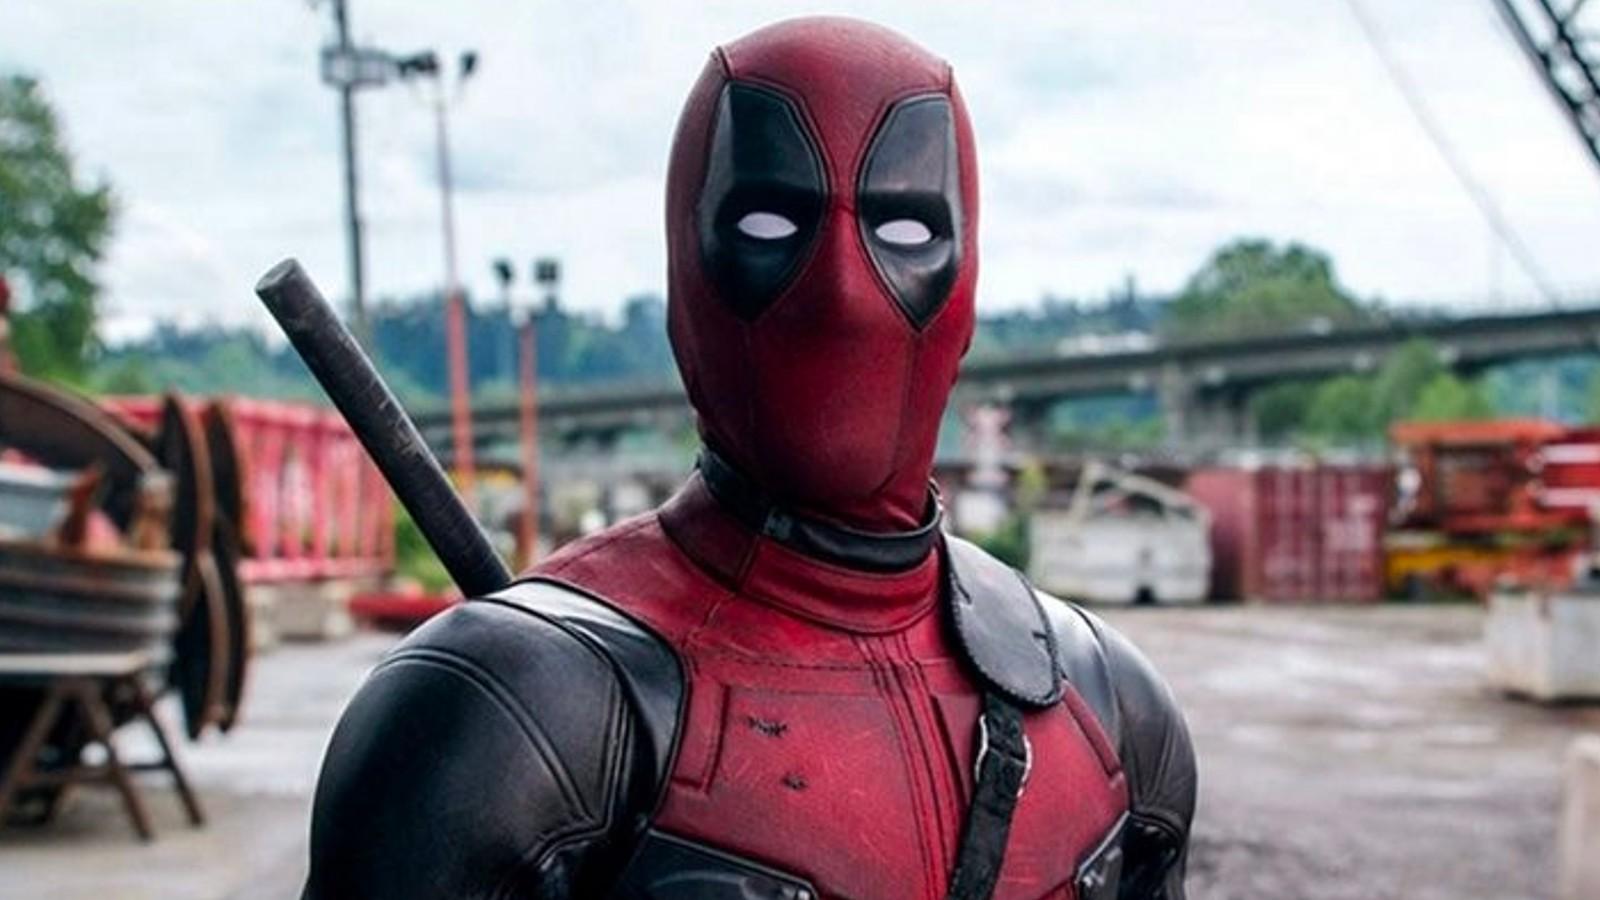 Deadpool 3 Will Honor the Legacy of Fox's X-Men Universe, Says